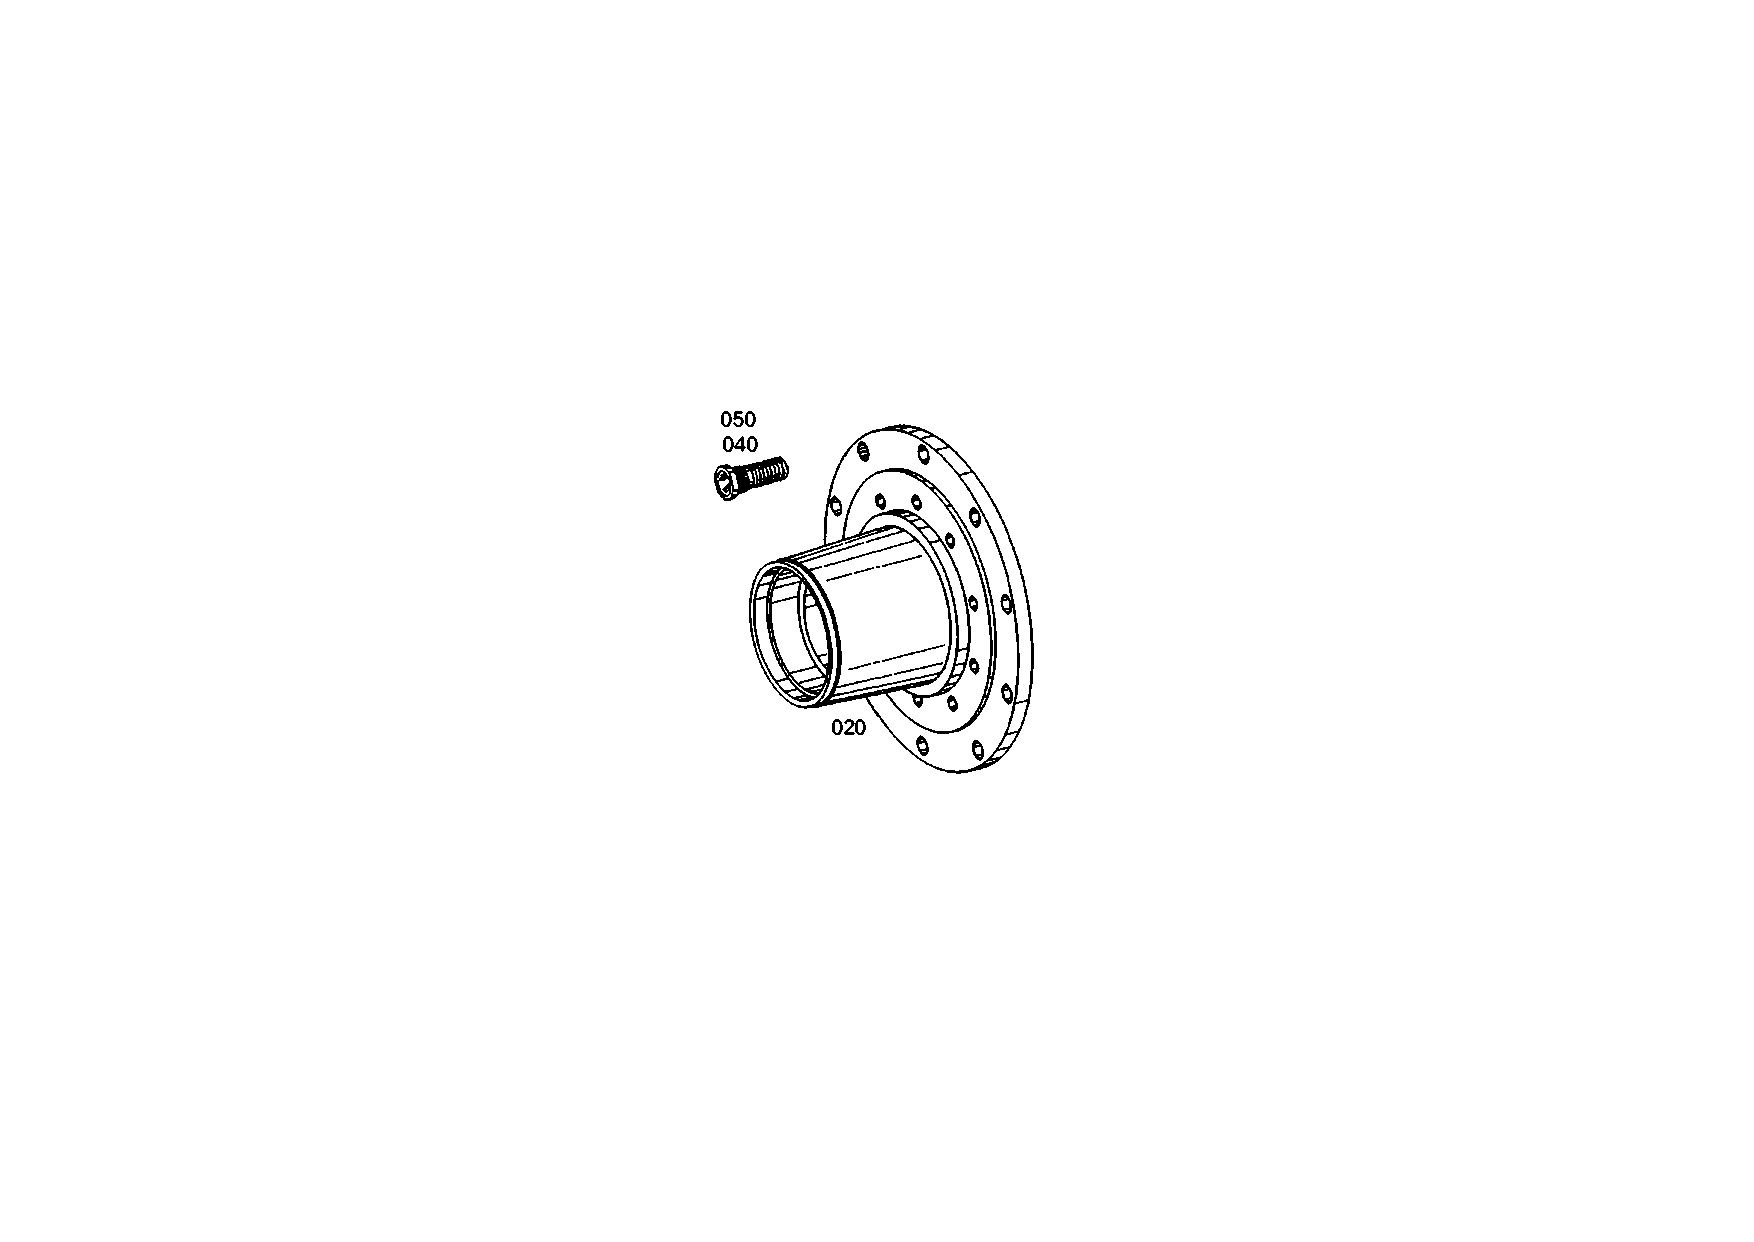 drawing for E. N. M. T. P. / CPG (520304008) - WHEEL STUD (figure 2)